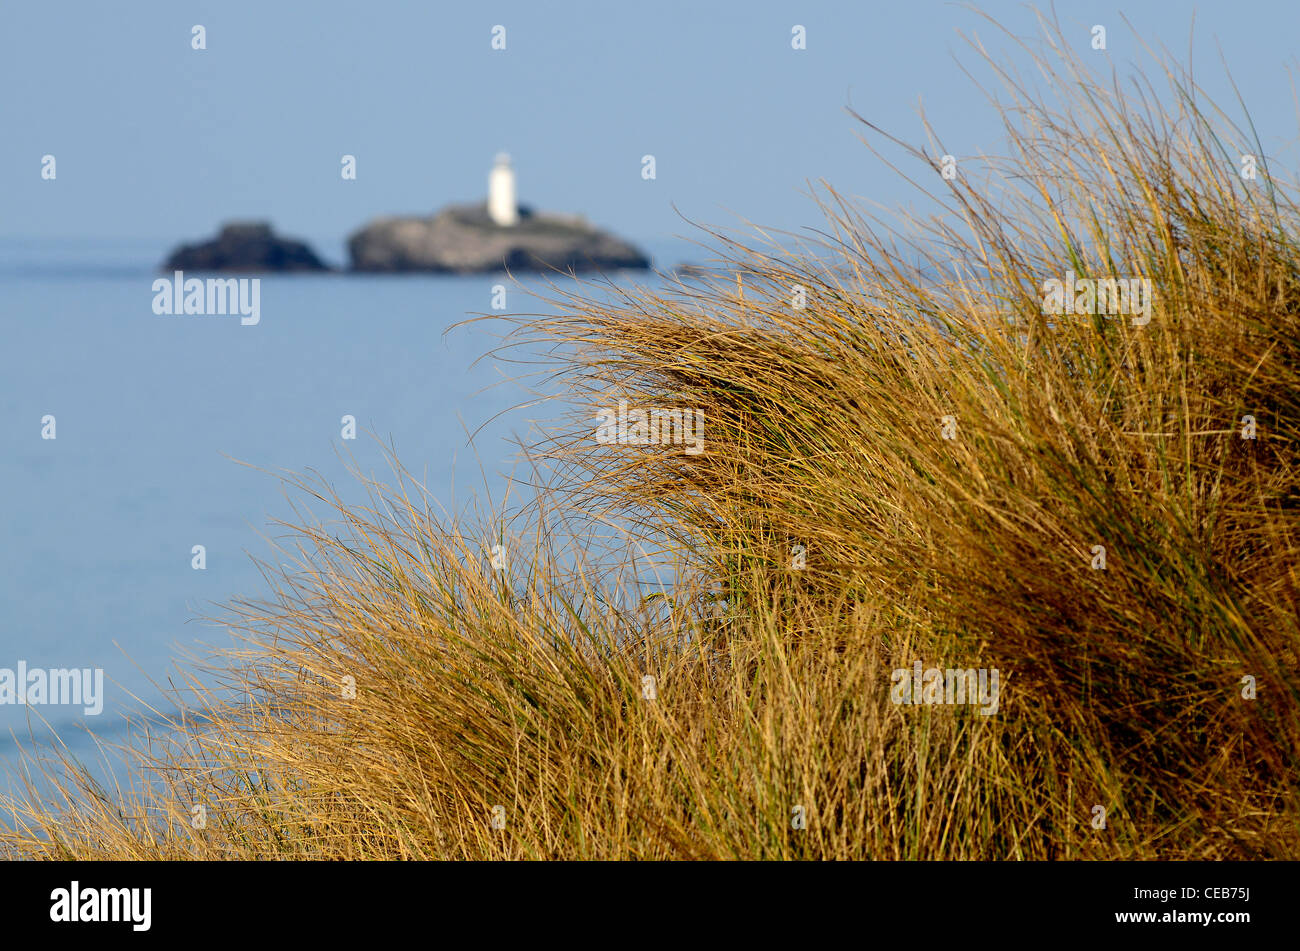 Dune grass with lighthouse on island Stock Photo